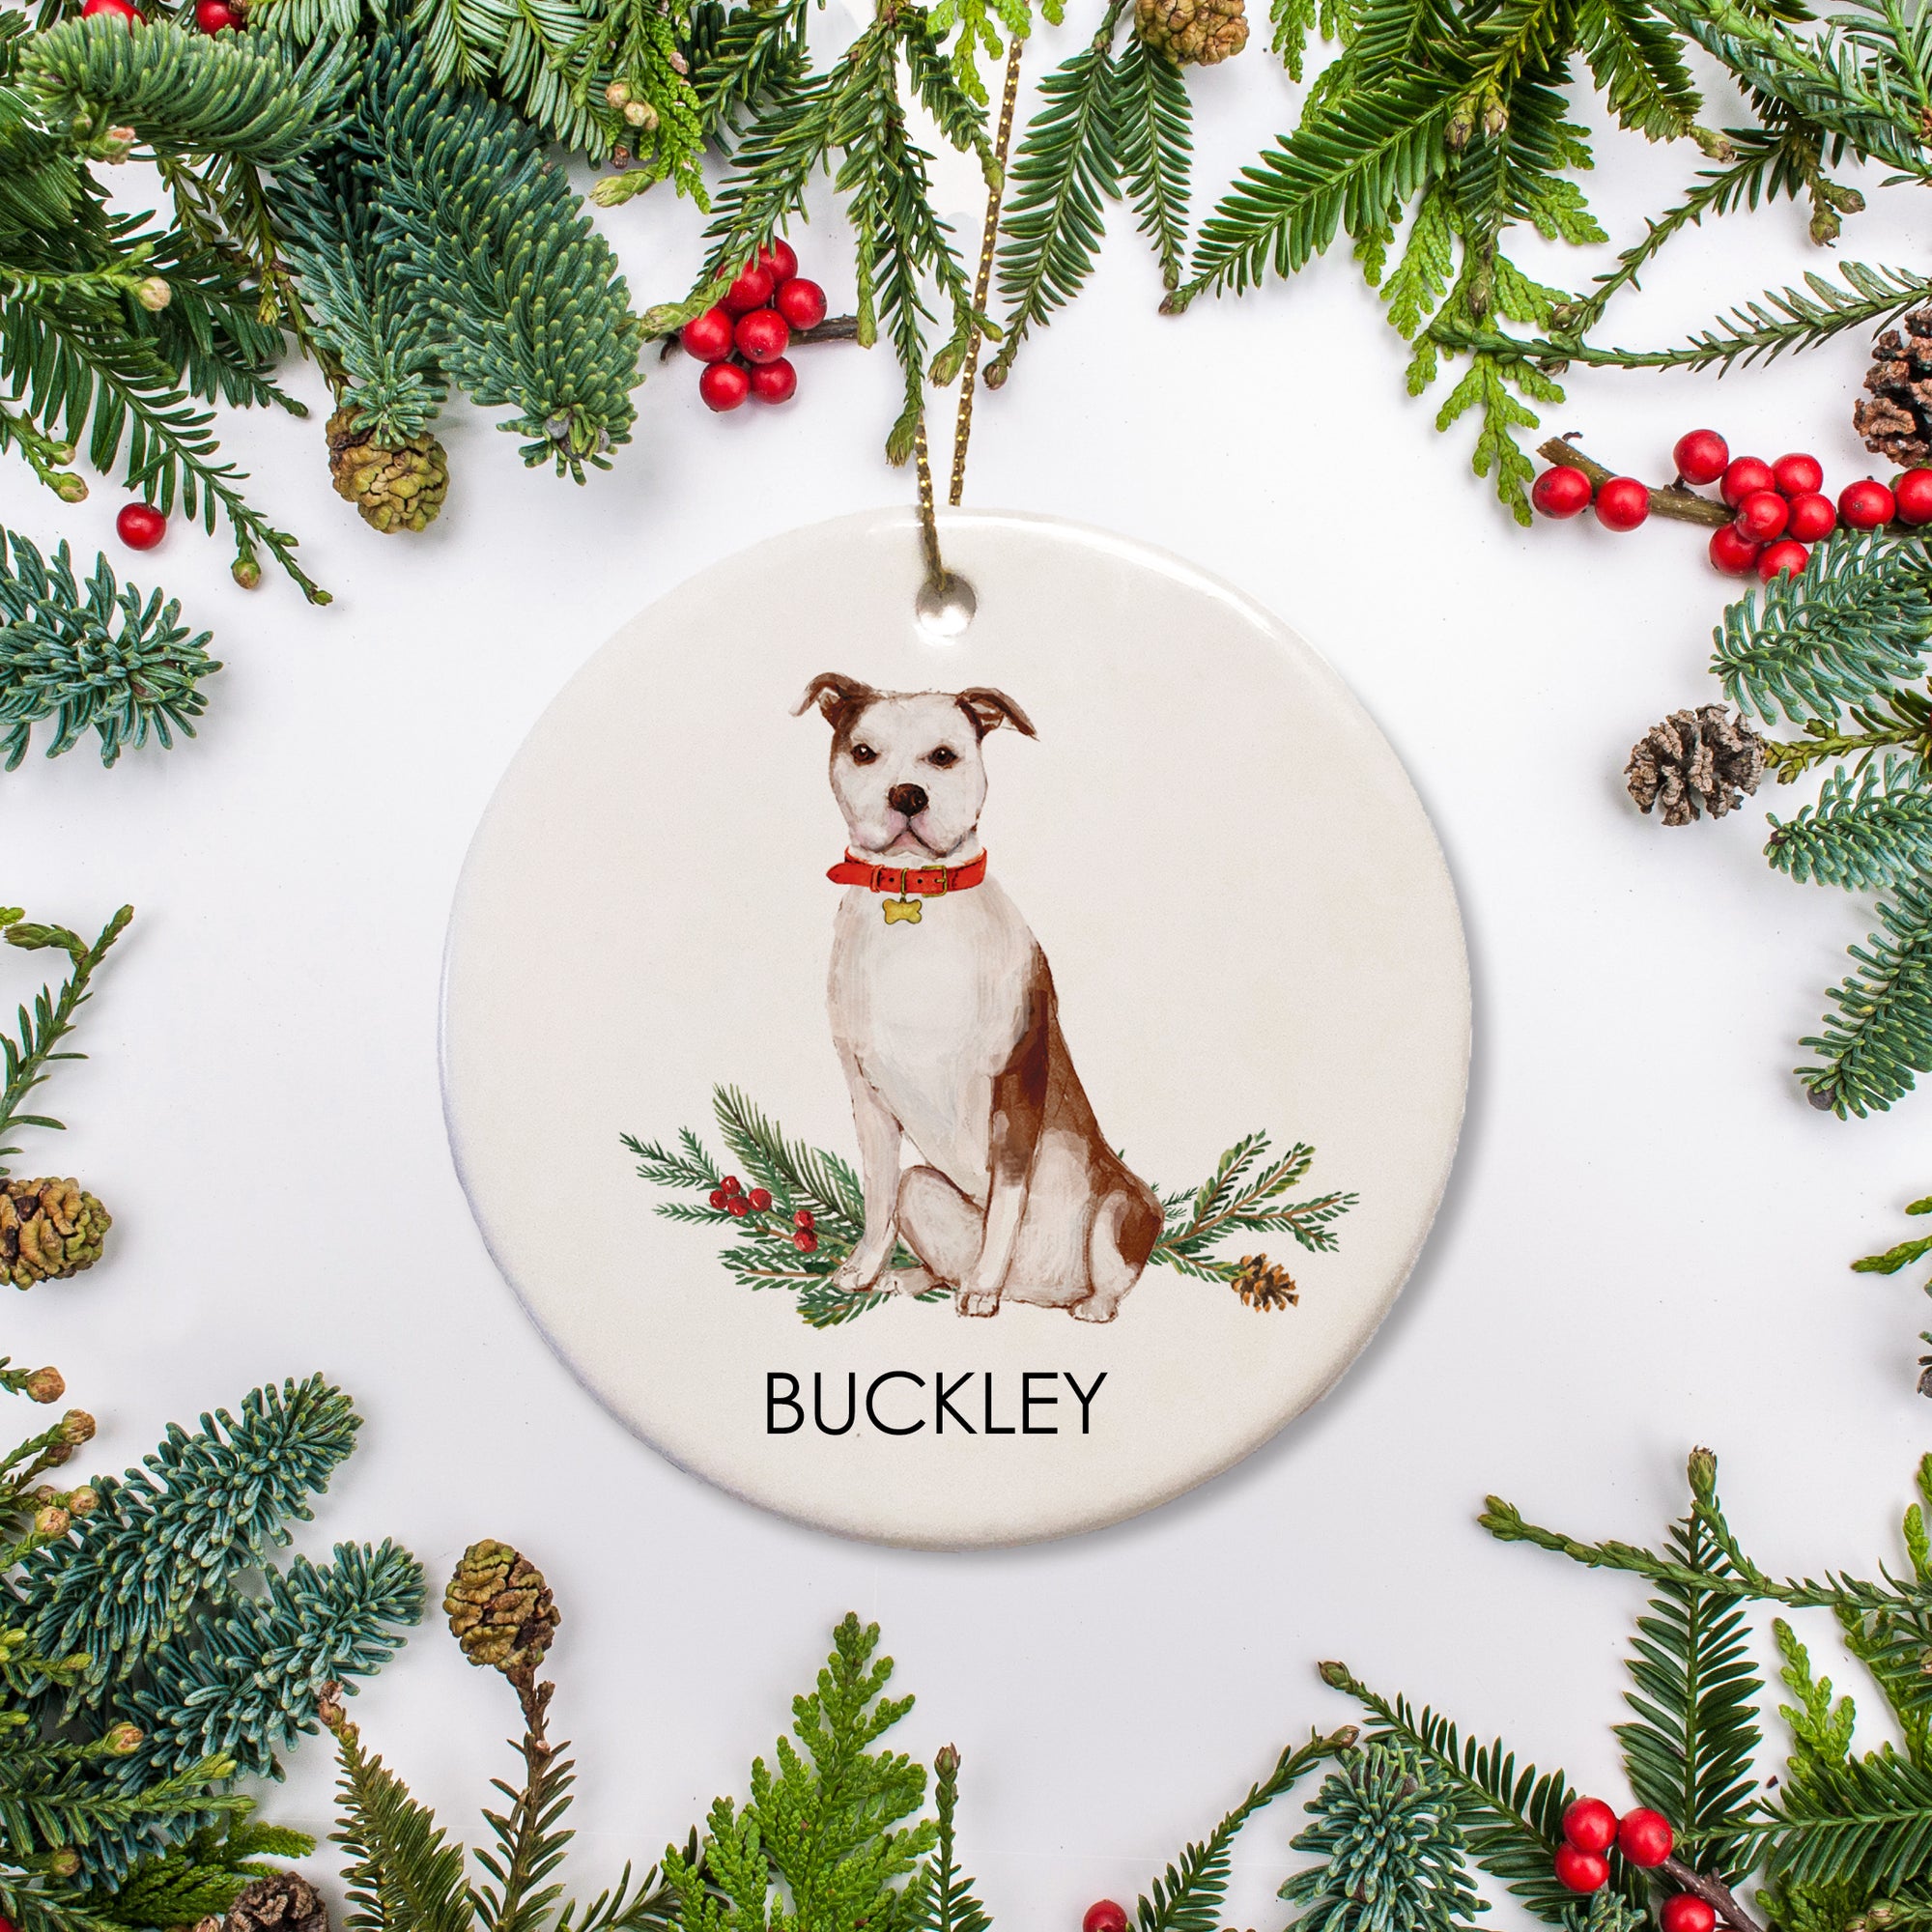 Pit Bull christmas ornament featuring a brown dog with a white chest and face, personalized ceramic ornament